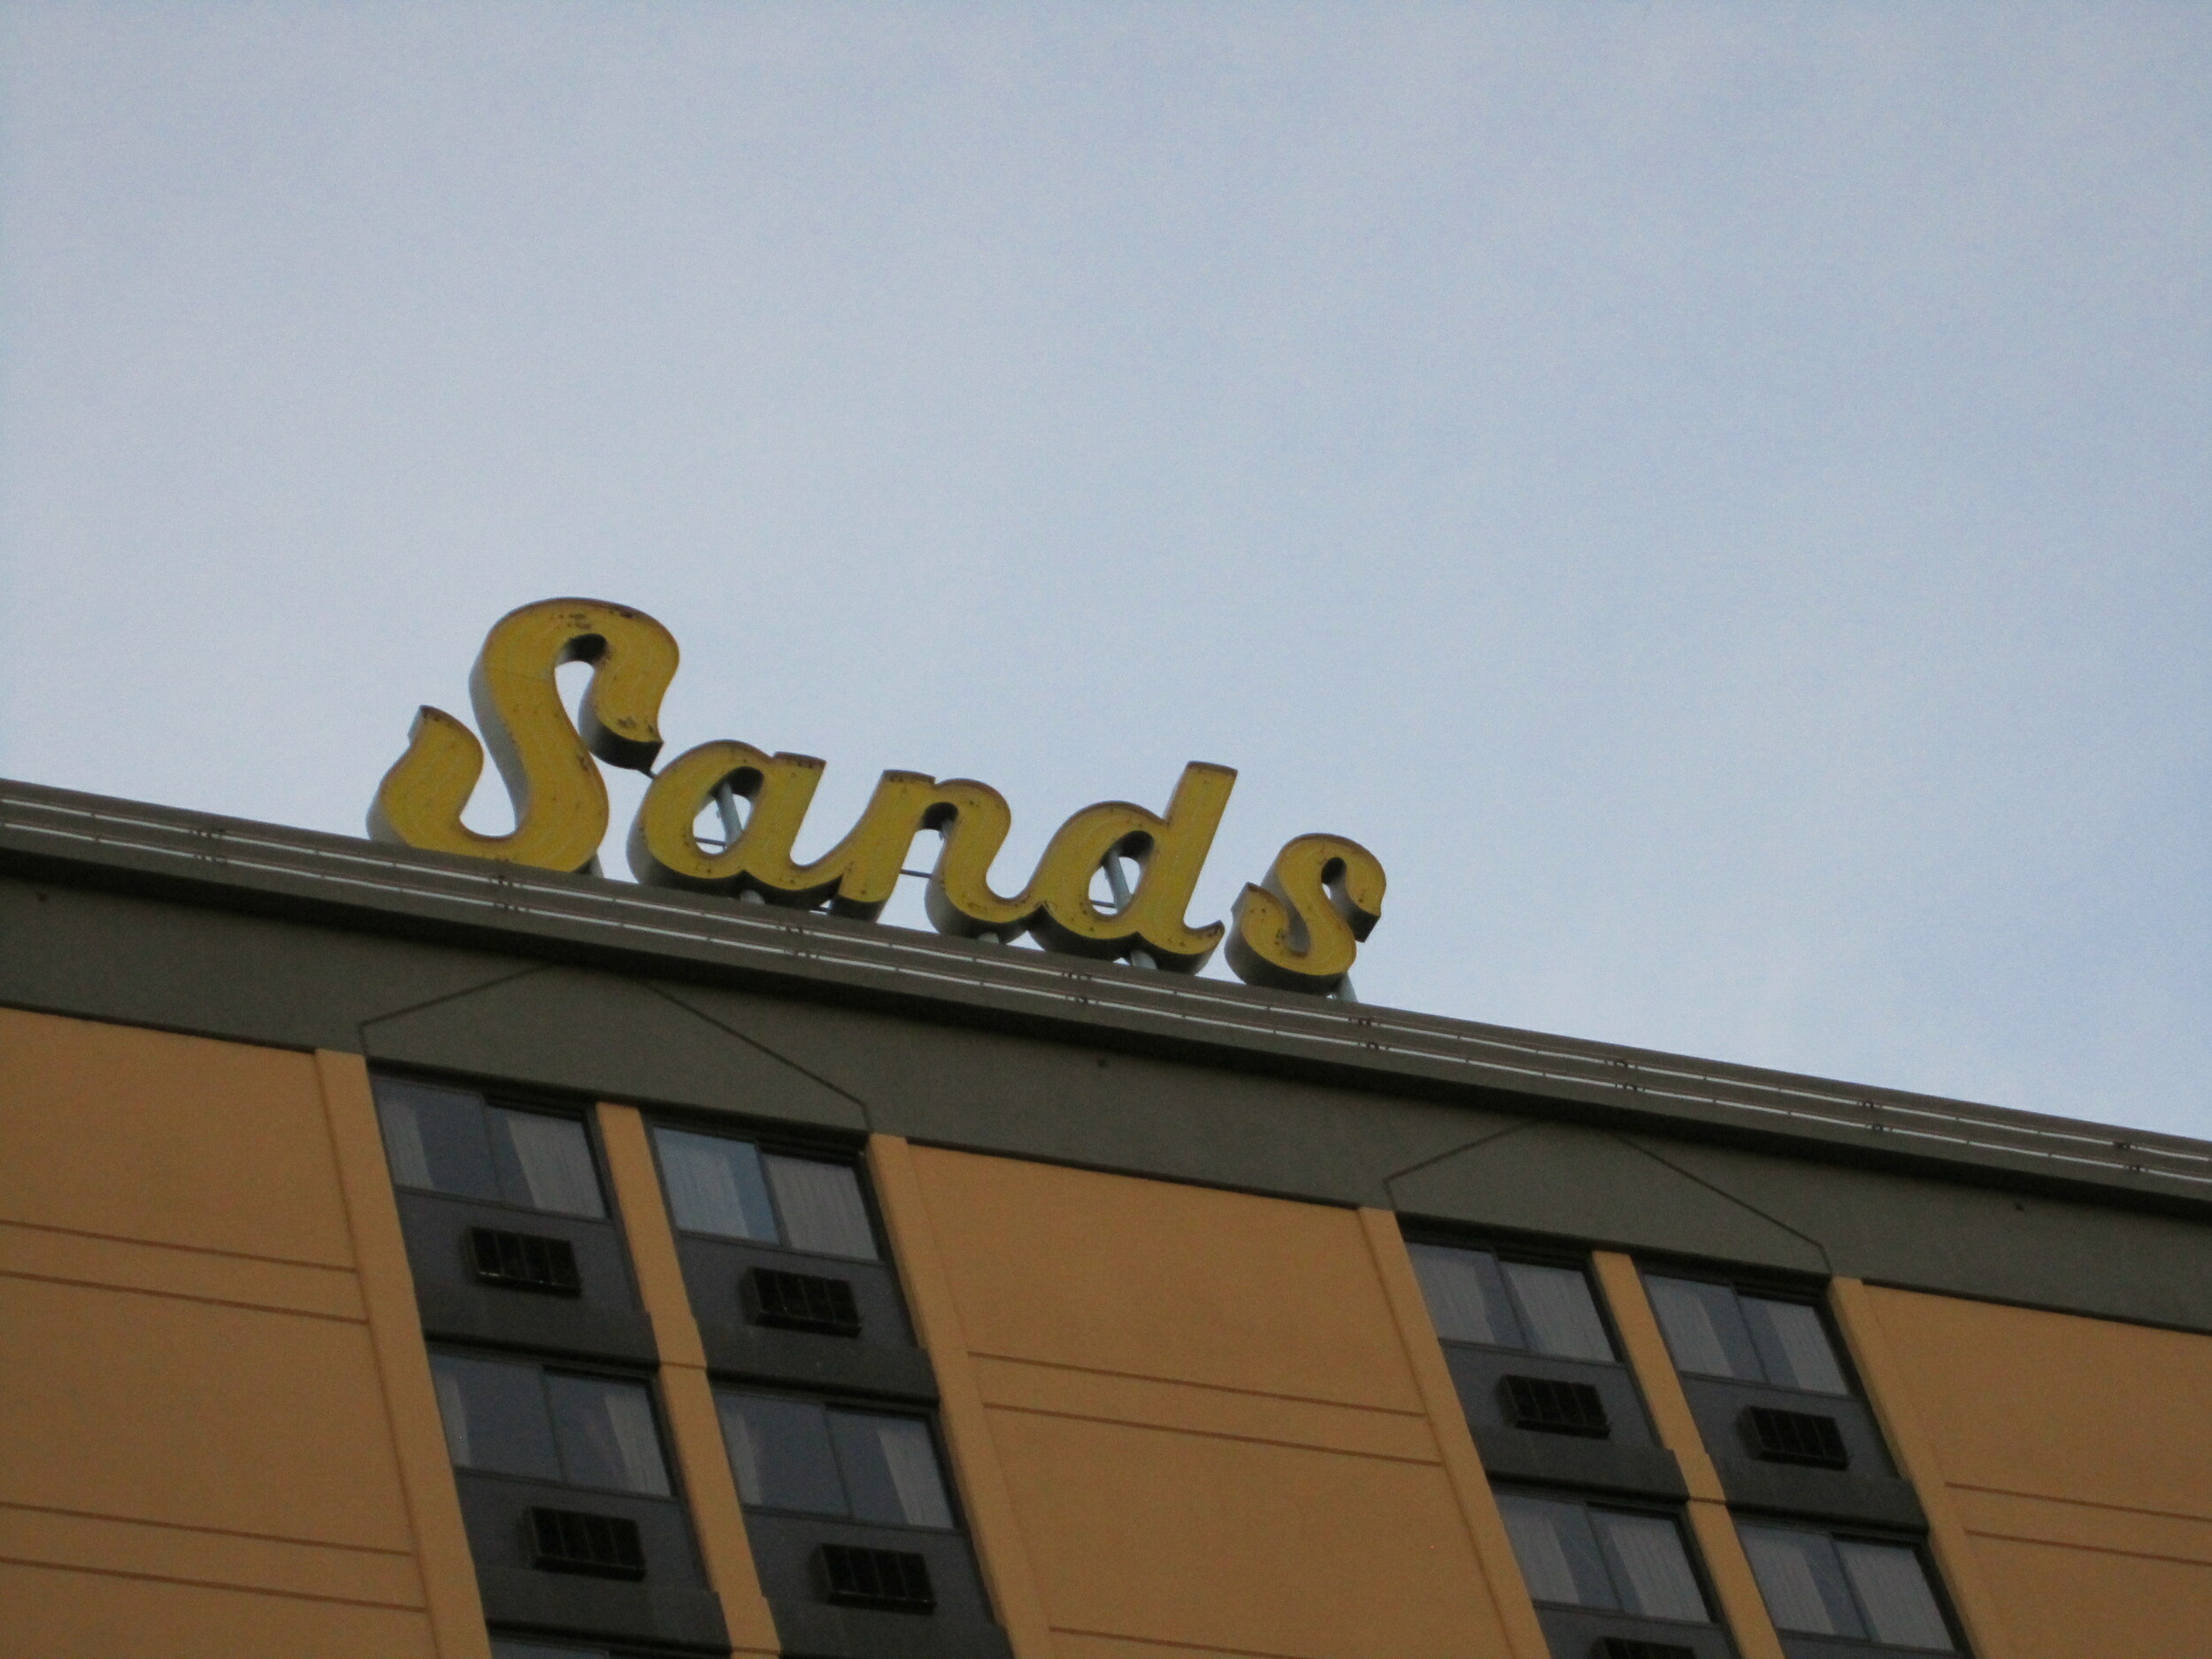 Sands Regency roof mounted sign, Reno, Nevada: photographic print